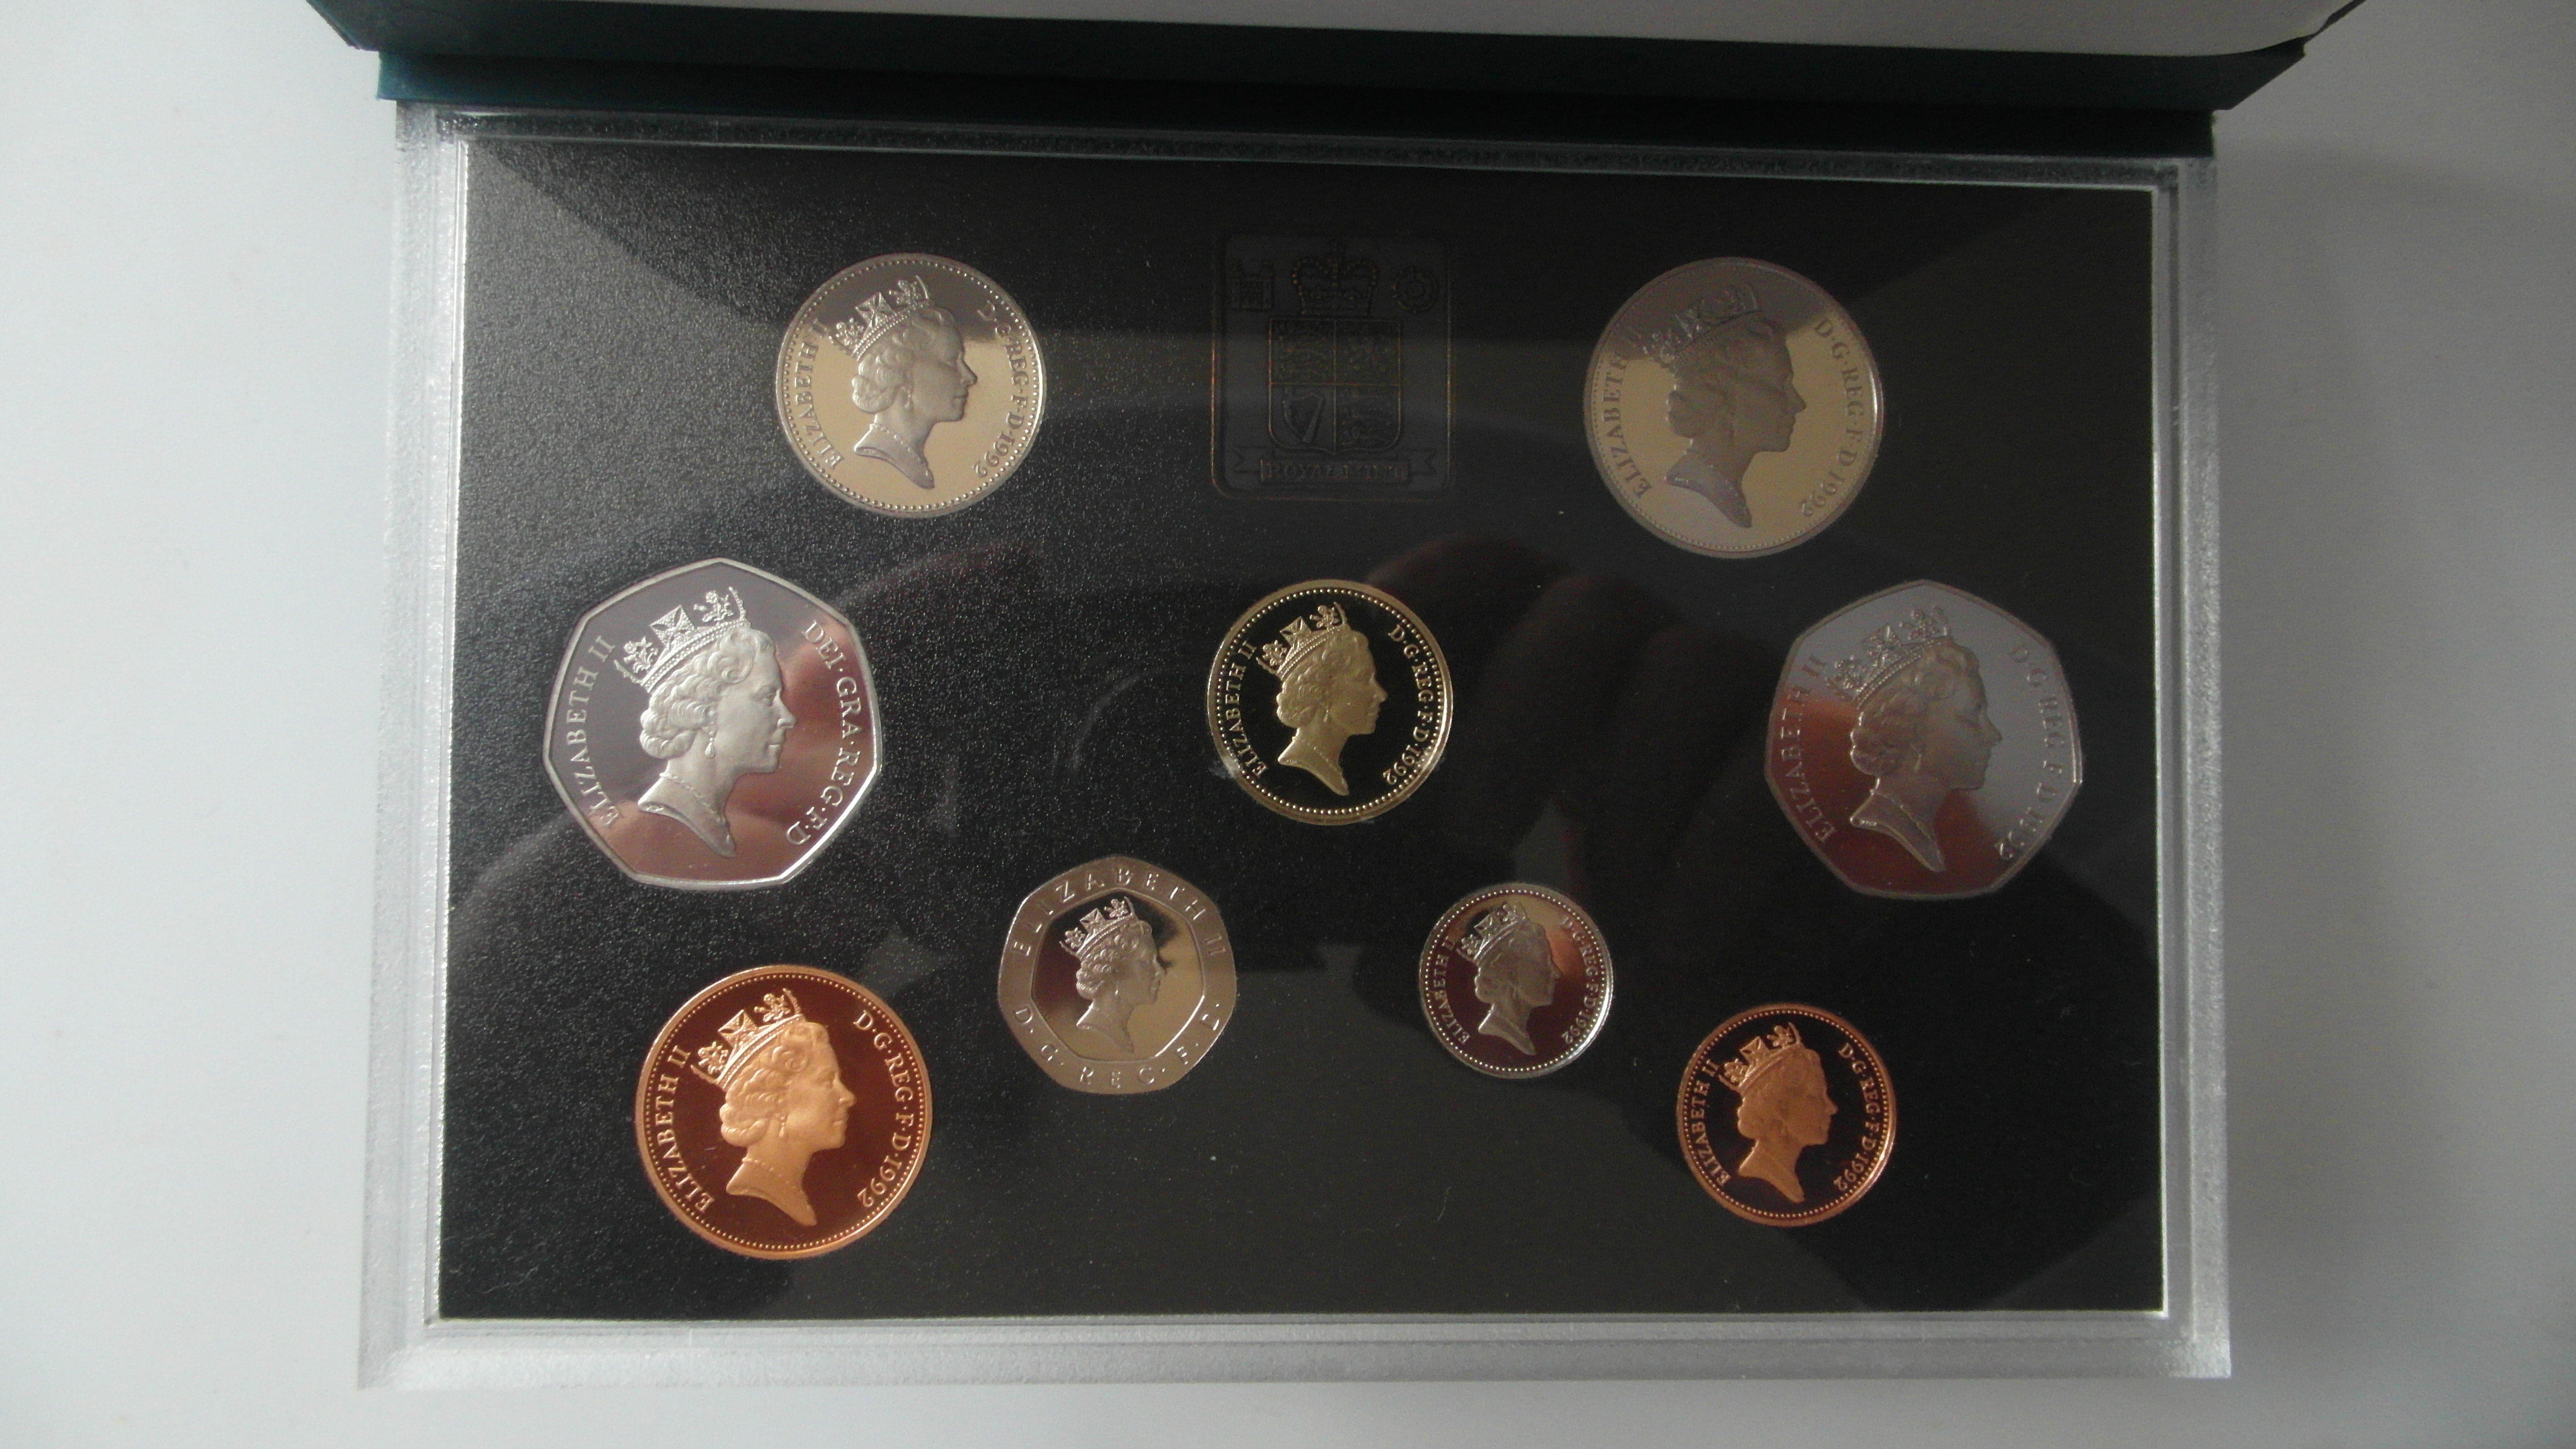 1992 RARE ROYAL MINT UNITED KINGDOM DELUXE PROOF COIN COLLECTION - Image 4 of 6